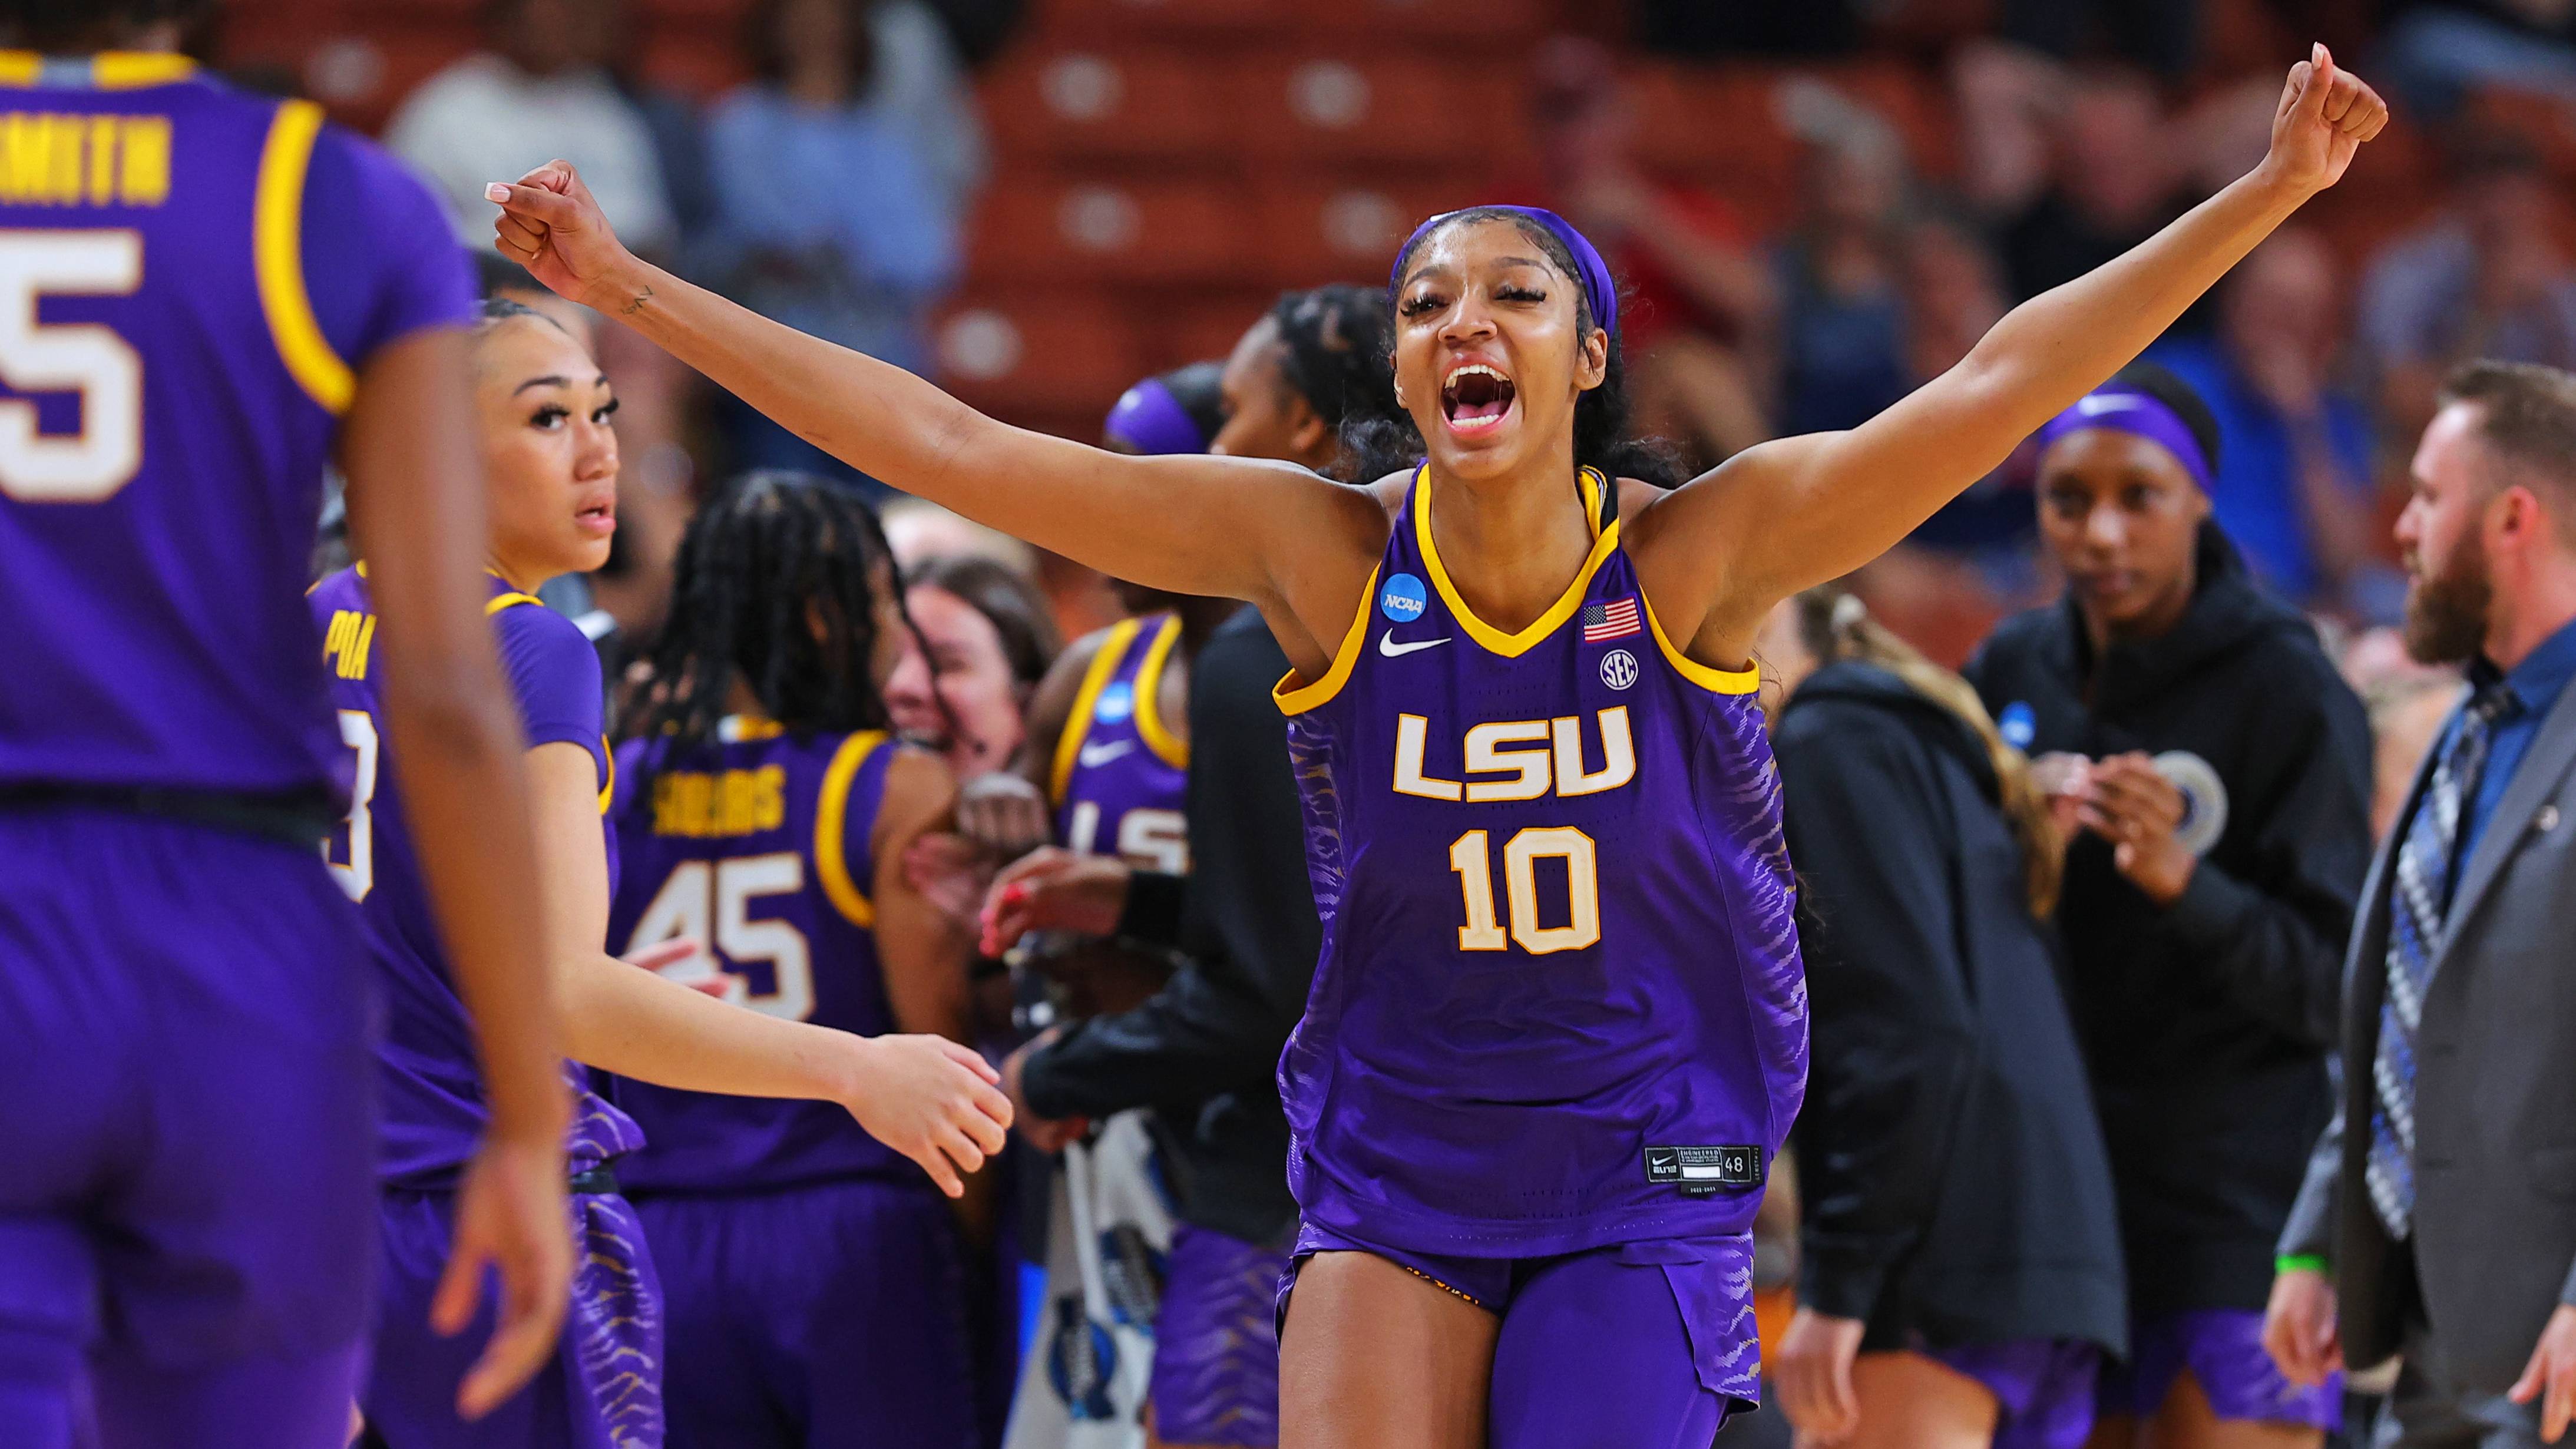 Angel Reese NIL deals: How LSU star developed lucrative partnerships, from Amazon to Coach